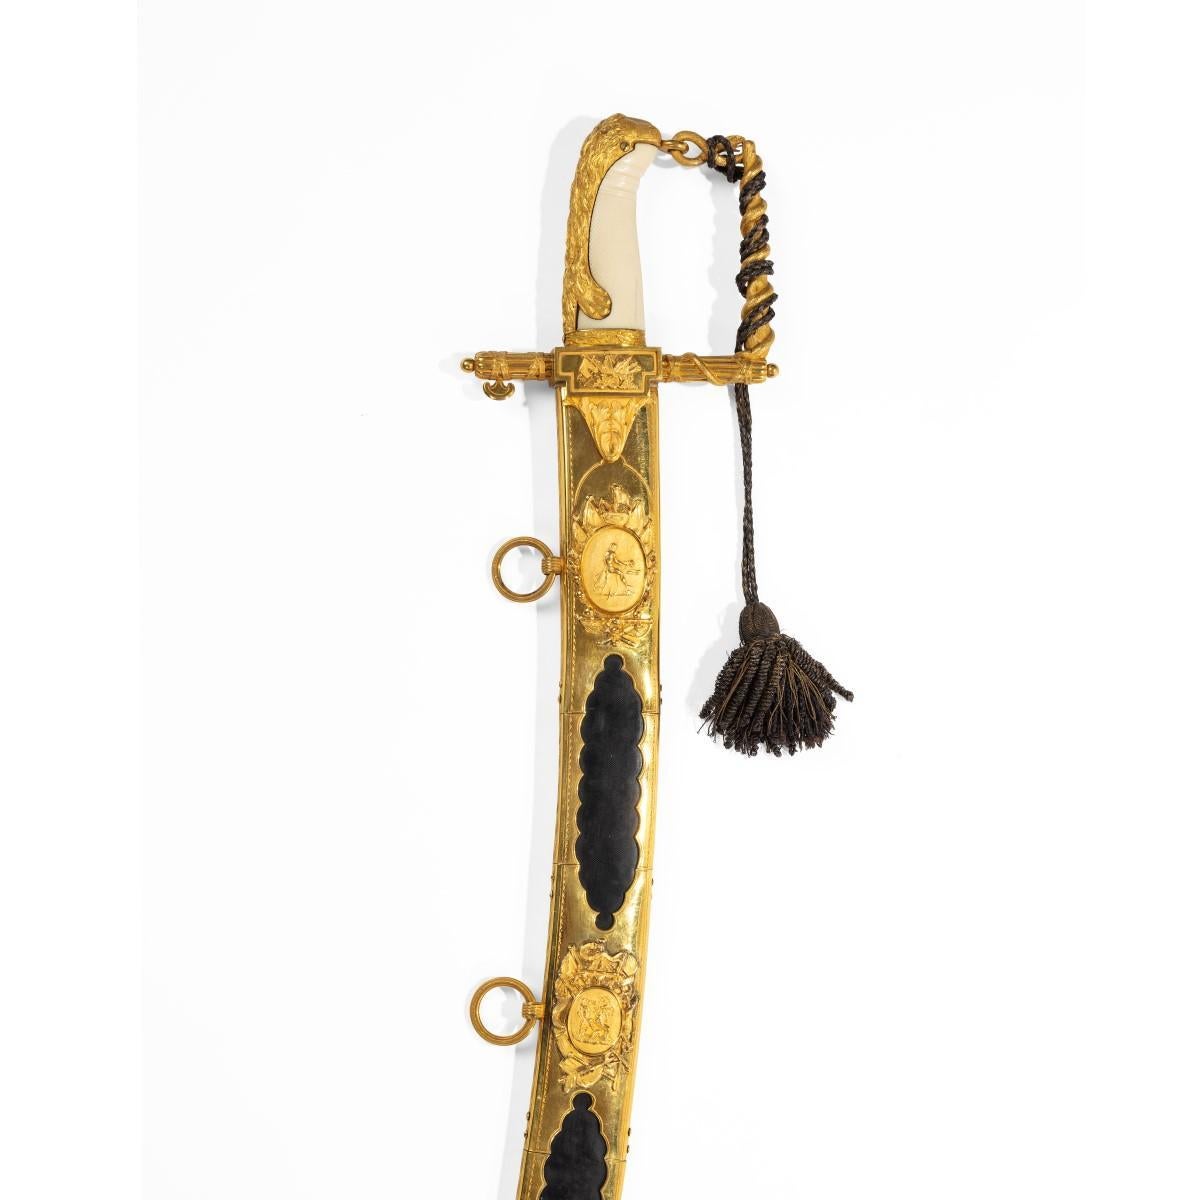 19th Century Cased Lloyds £50 Sword for Valour Awarded to Lt. Ogle Moore of H.M.S. Maidston